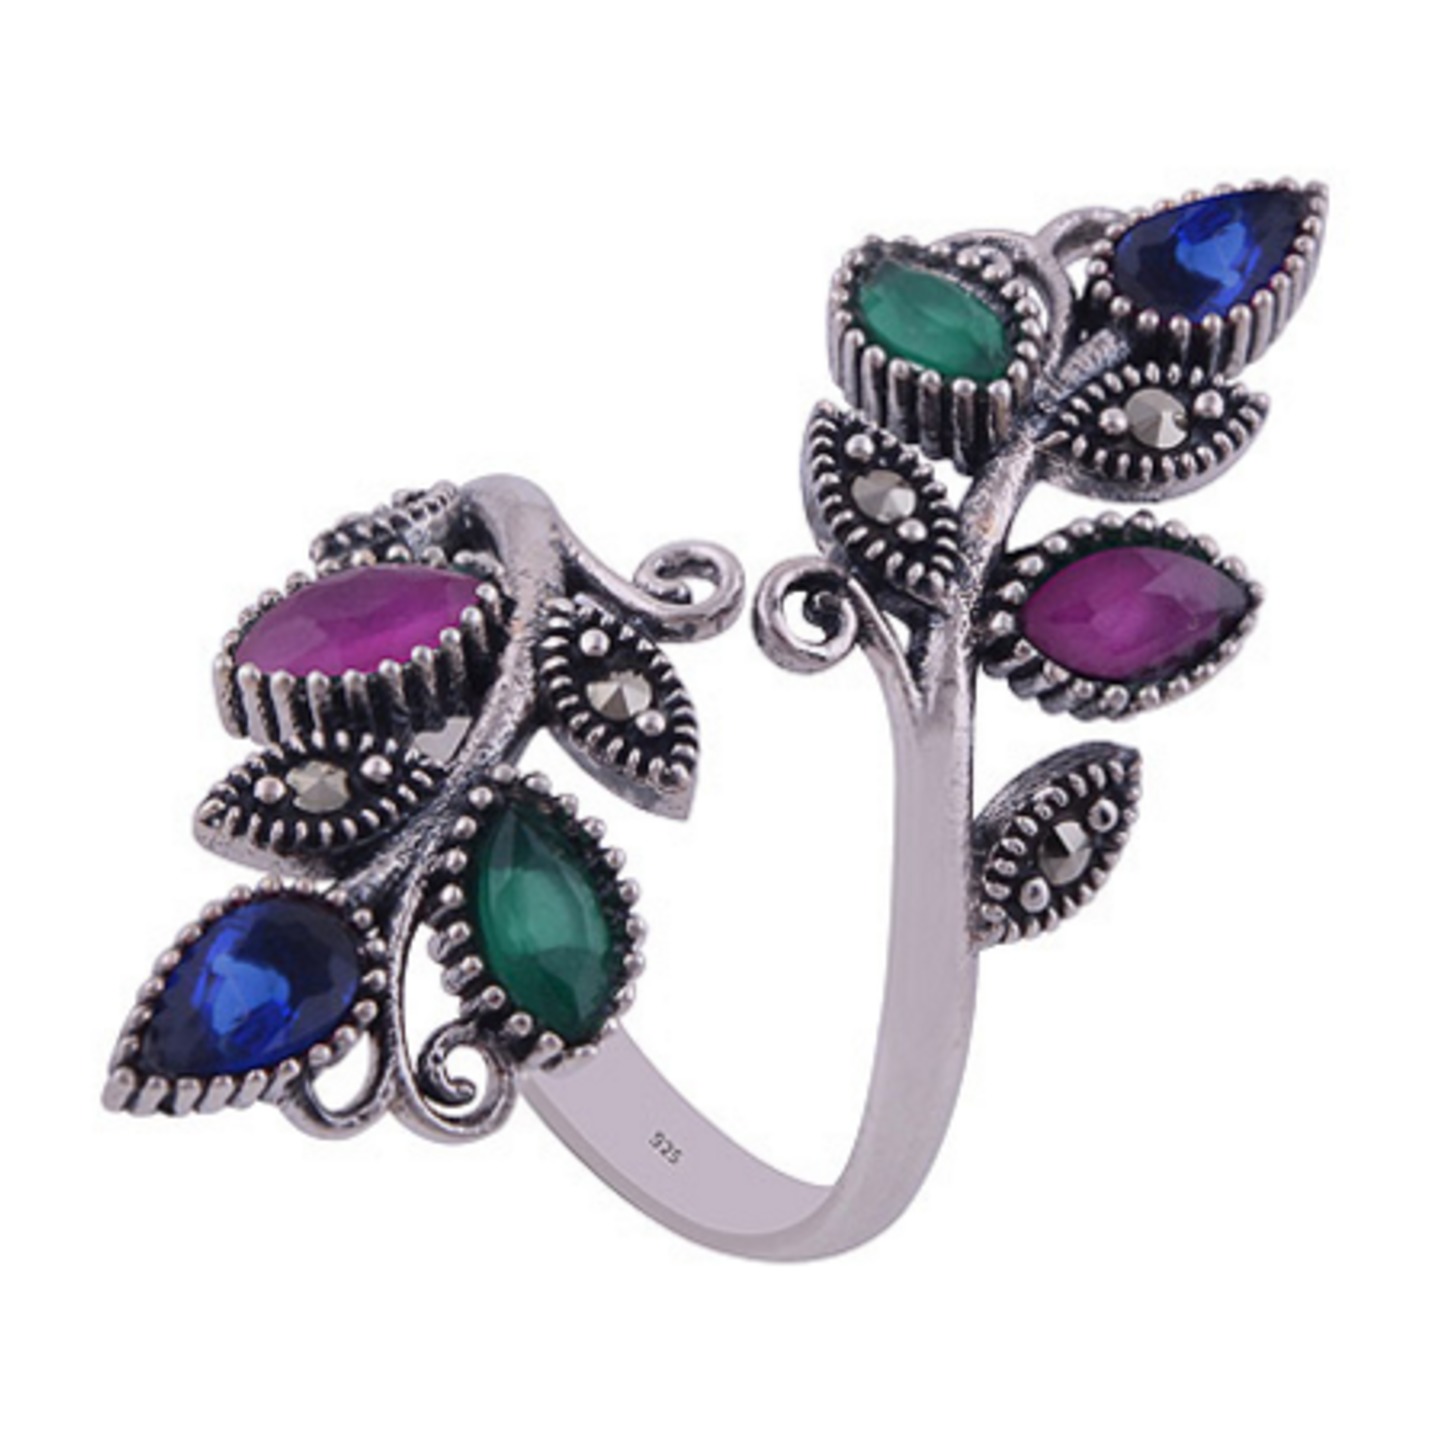 The Red Blue Green Vine Silver Ring